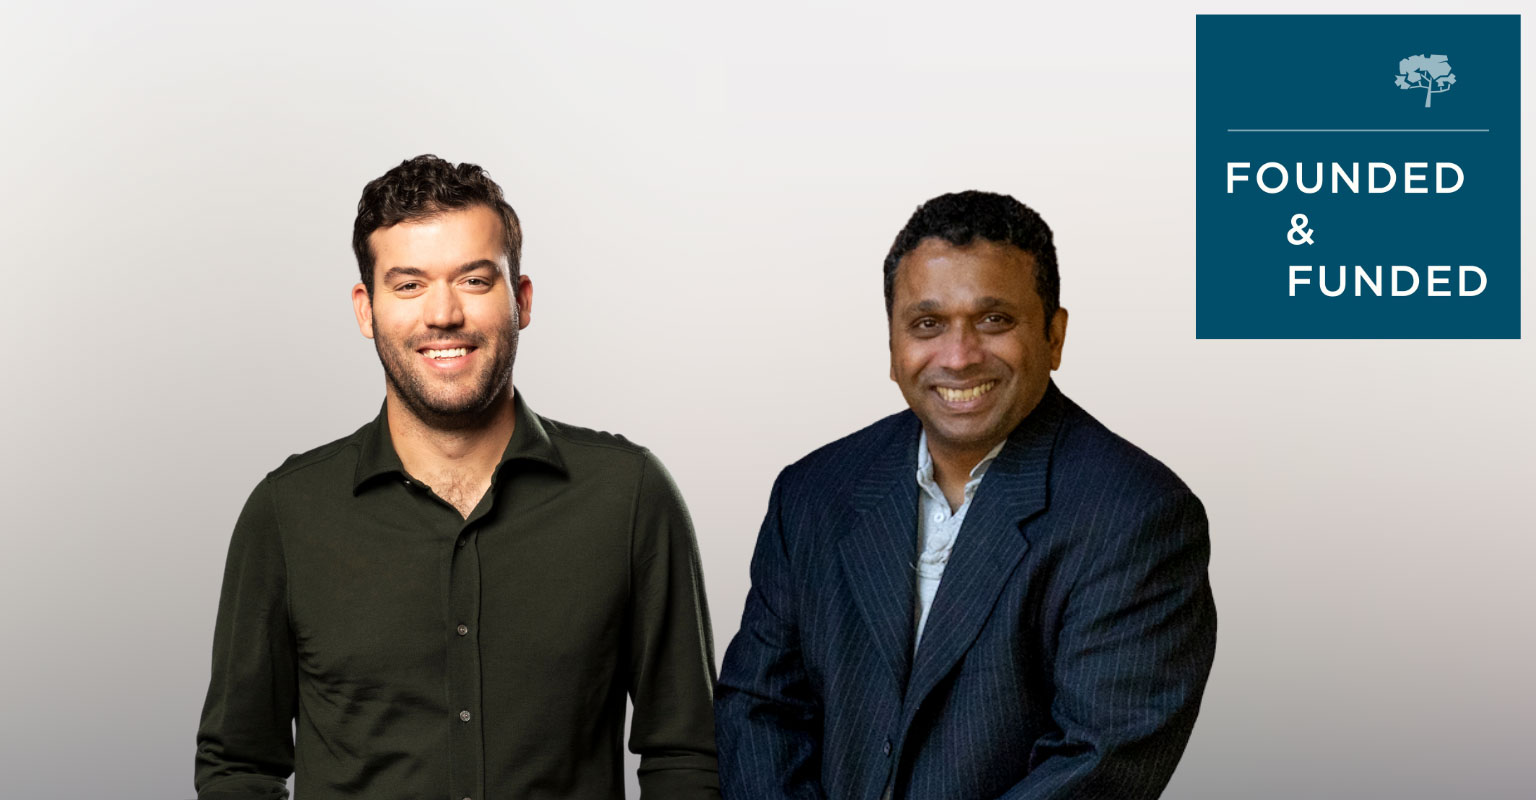 Sila's Shamir Karkal talks Crypto and Web3 with Madrona Partner Chris Picardo on Founded and Funded.